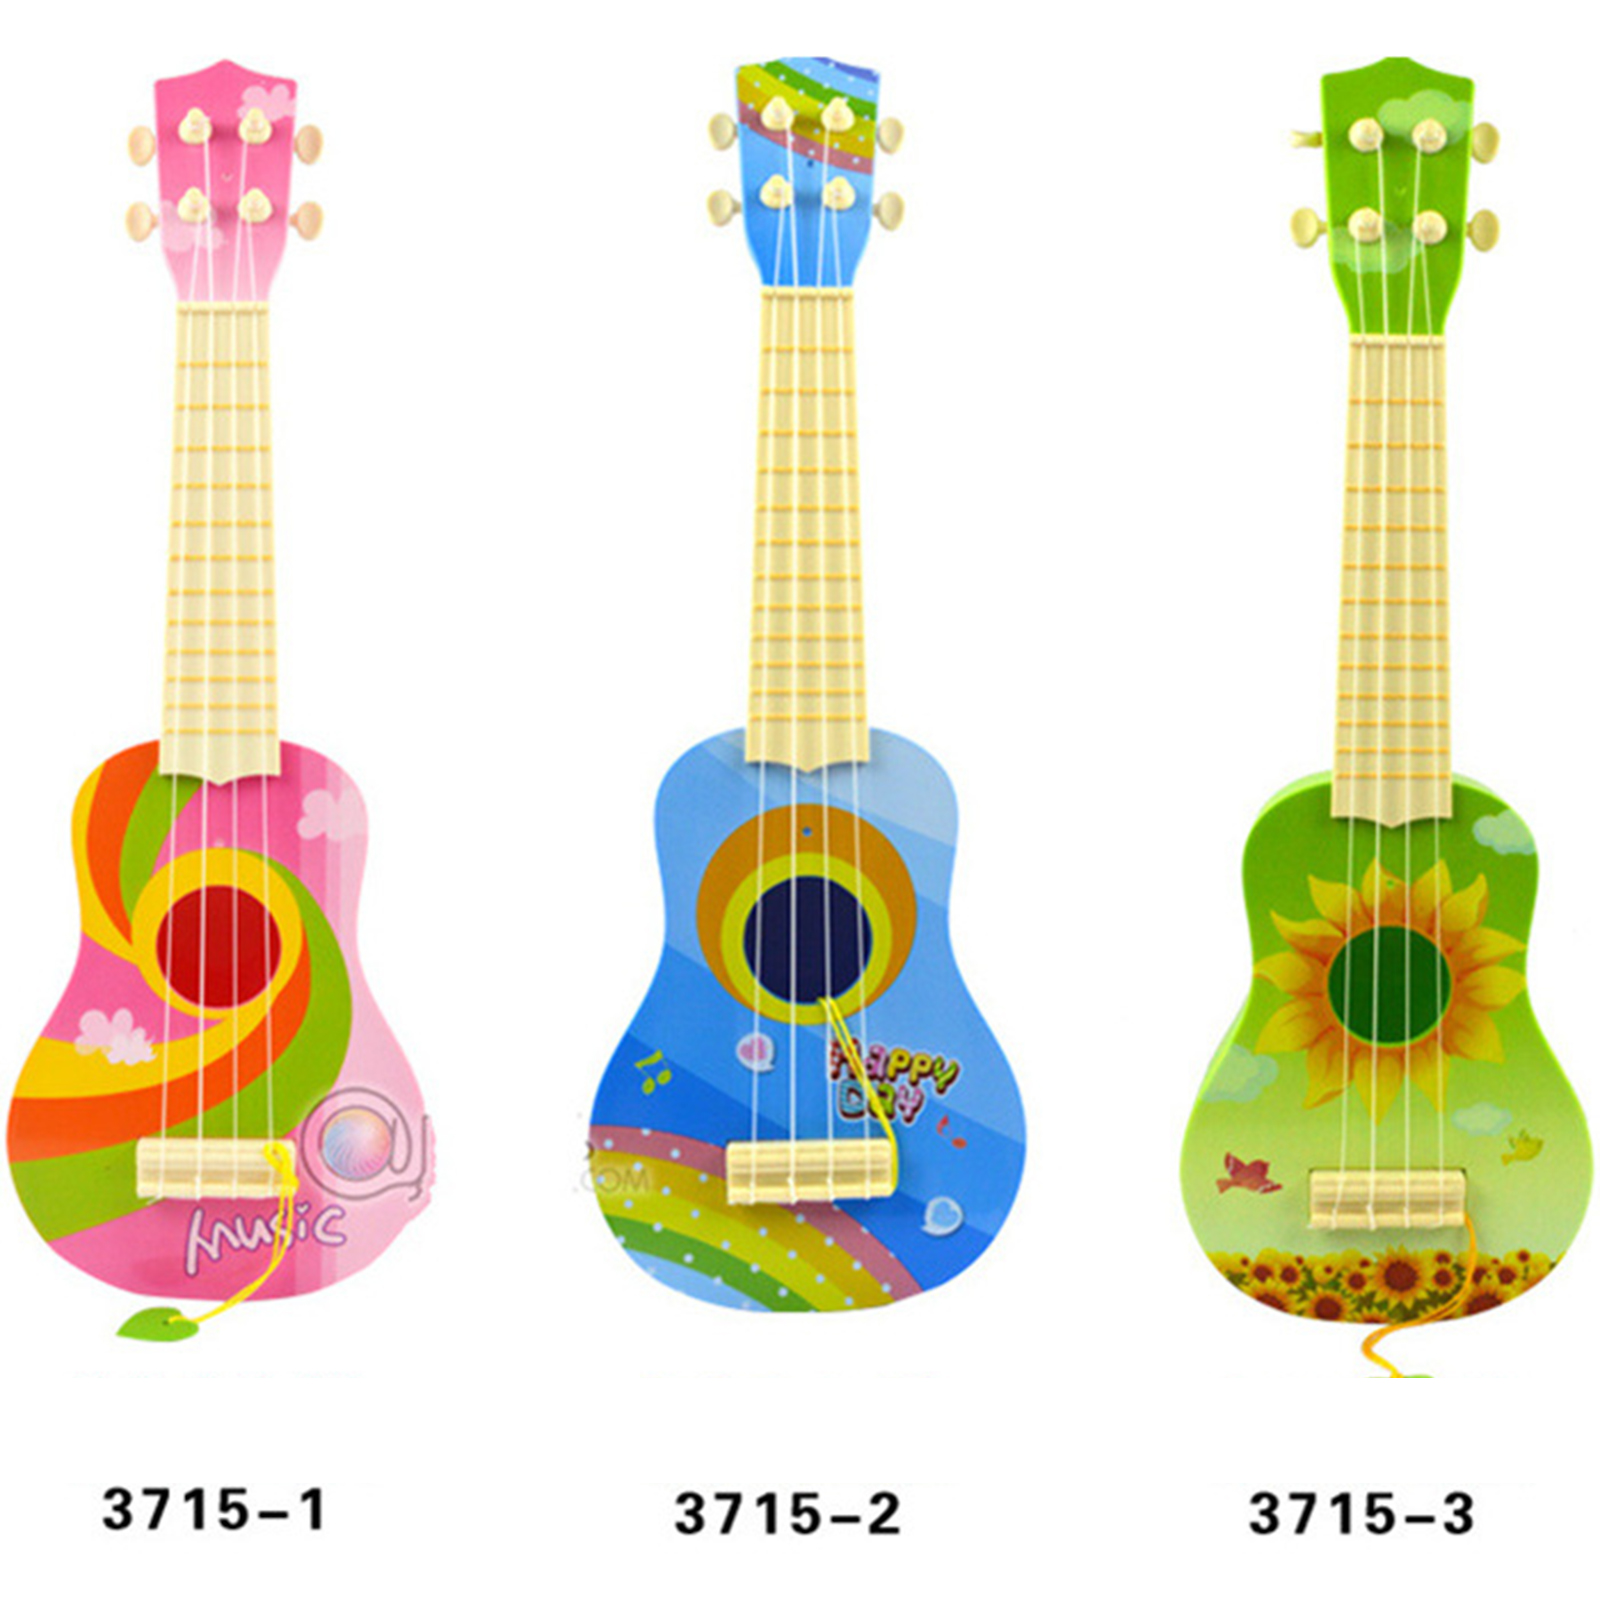 Kids Guitar Toys Cartoon Ukulele Guitar 4 Strings Music Instrument Early Educational Toys For Boys Girls Birthday Christmas Gifts